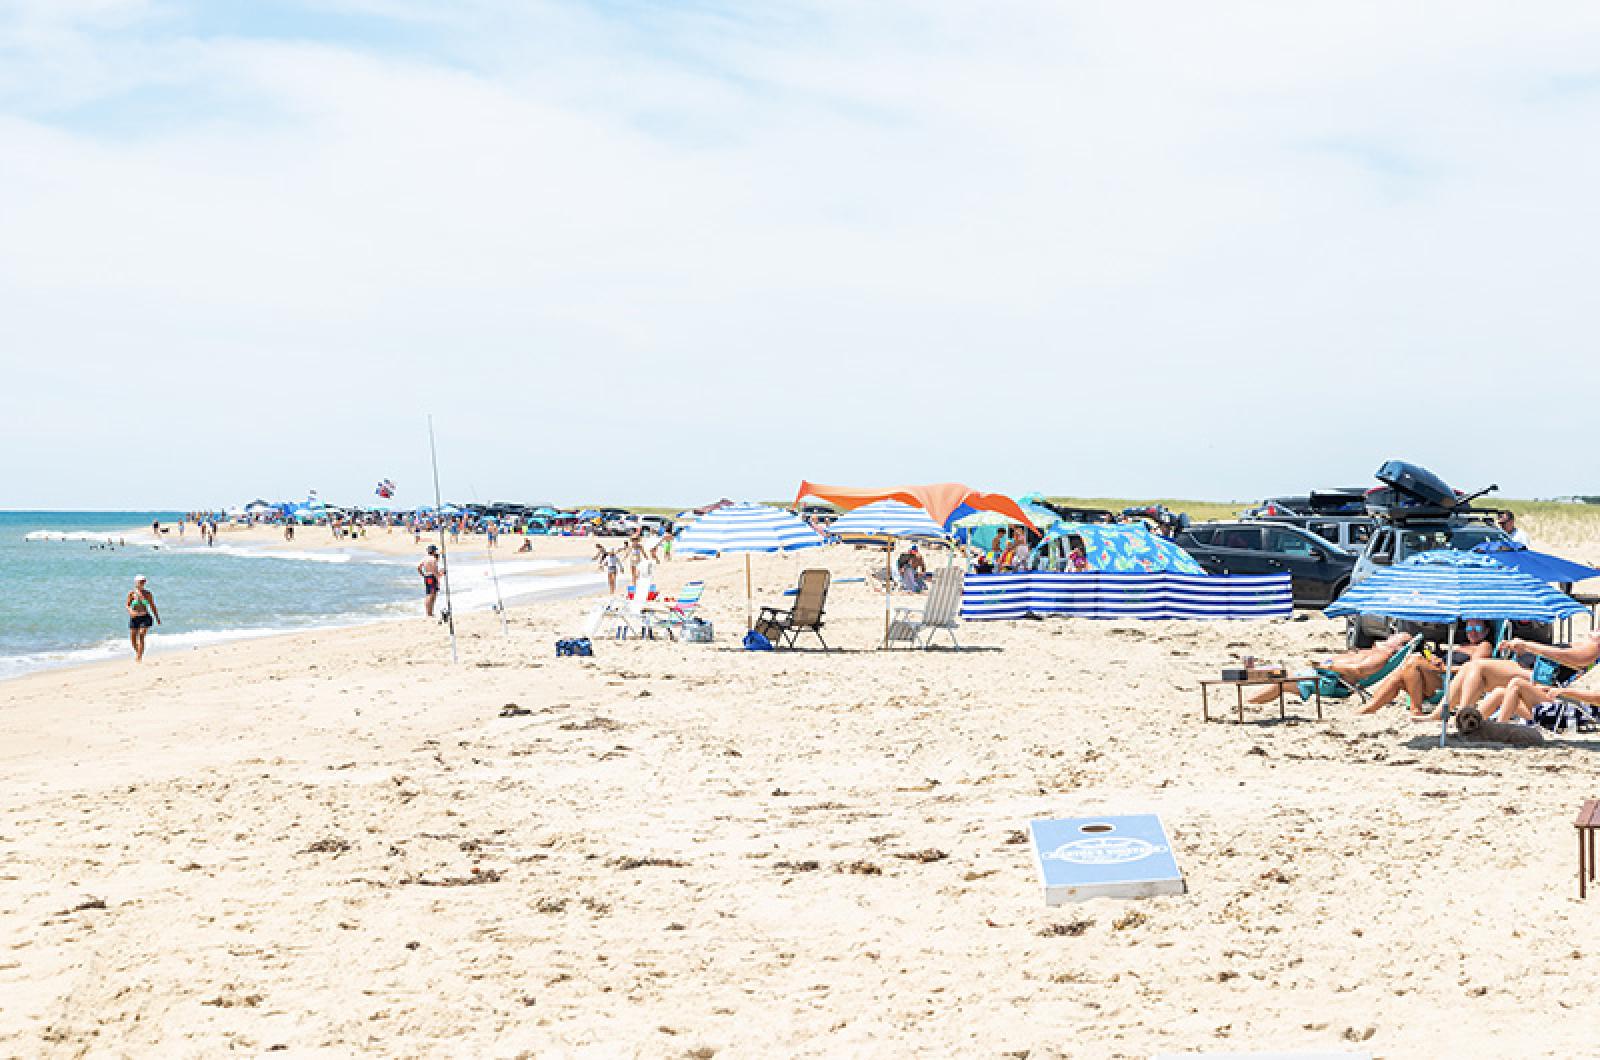 The Vineyard Gazette - Martha's Vineyard News  After Outcry, Trustees  Revisit Beach Access on Chappy